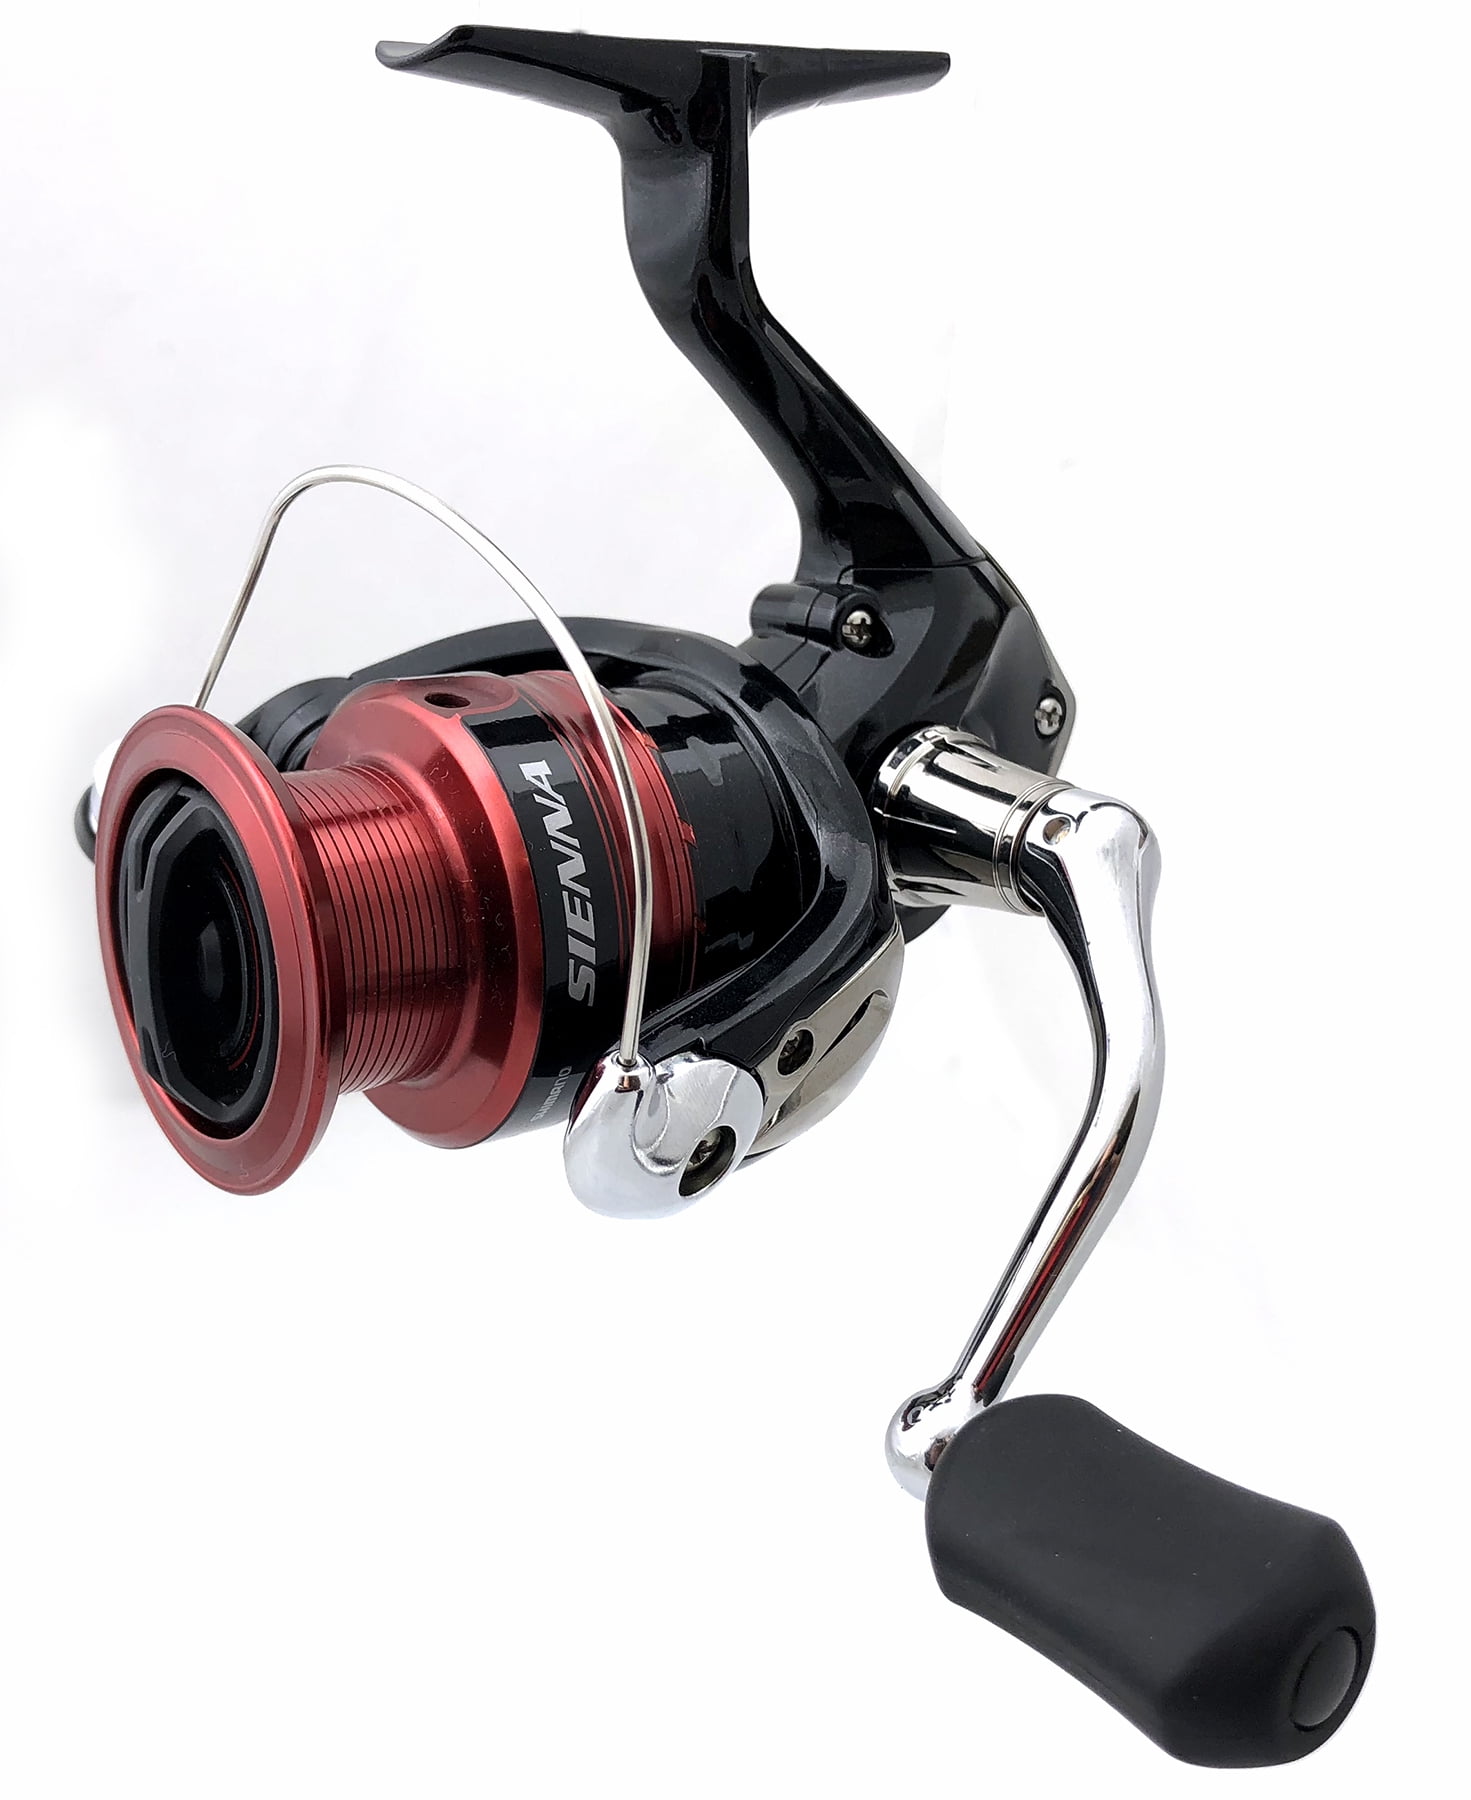 SHIMANO ALIVIO Spinning Reel with Line Bass Panfish and Trout Fishing Reel 